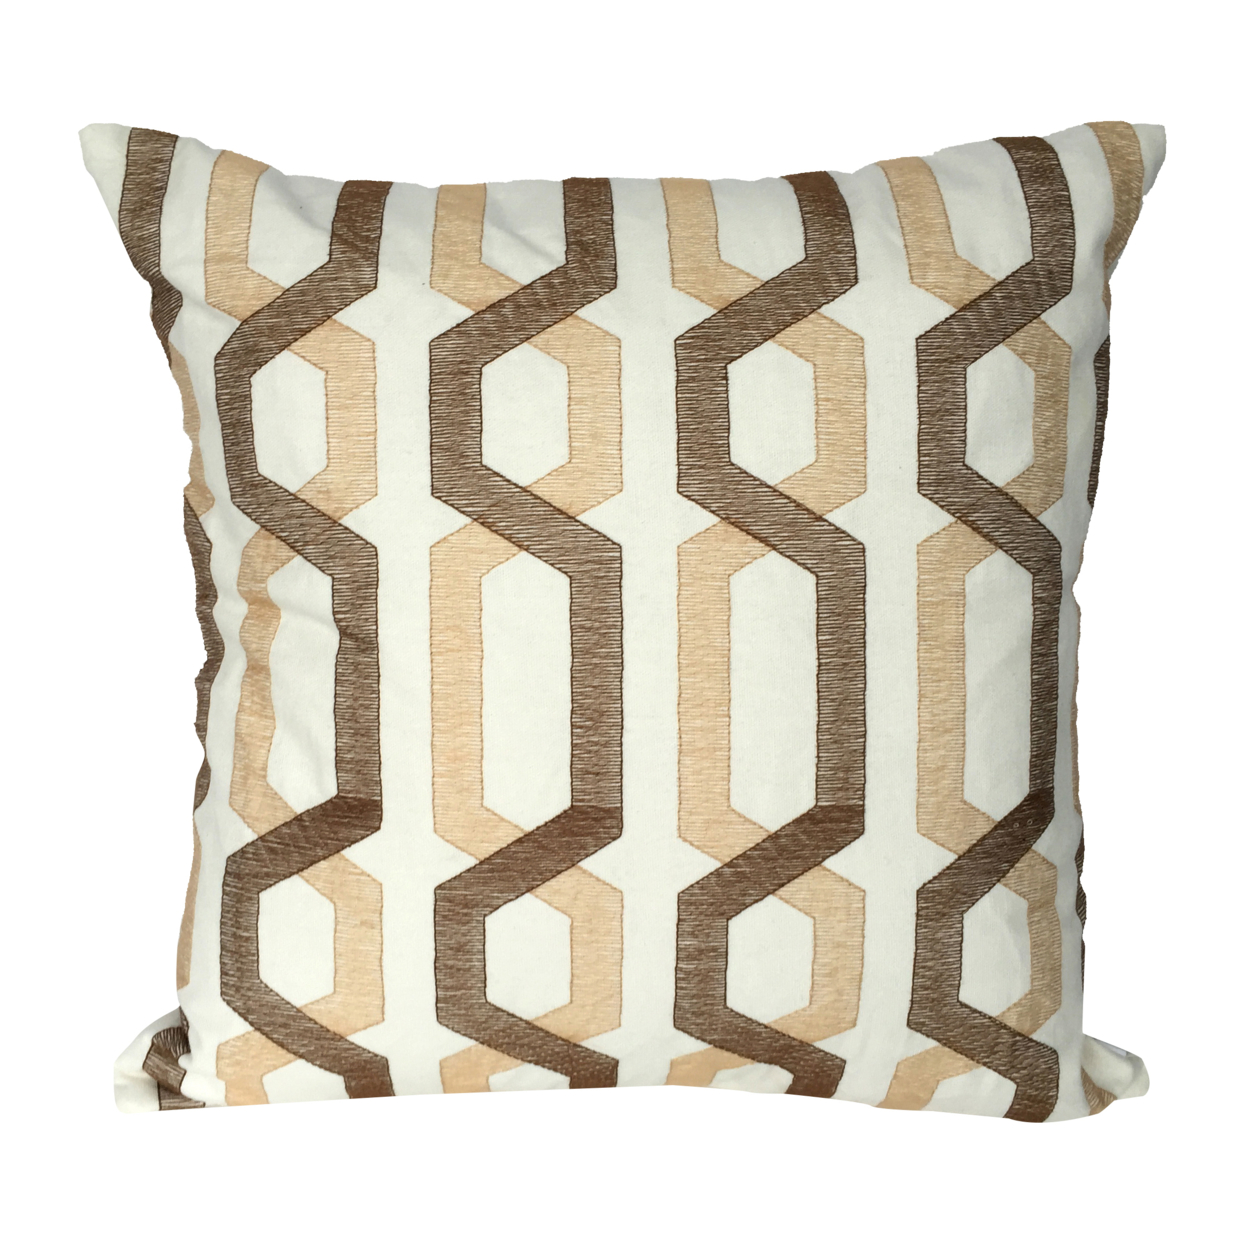 Contemporary Cotton Pillow With Geometric Embroidery, White And Brown- Saltoro Sherpi